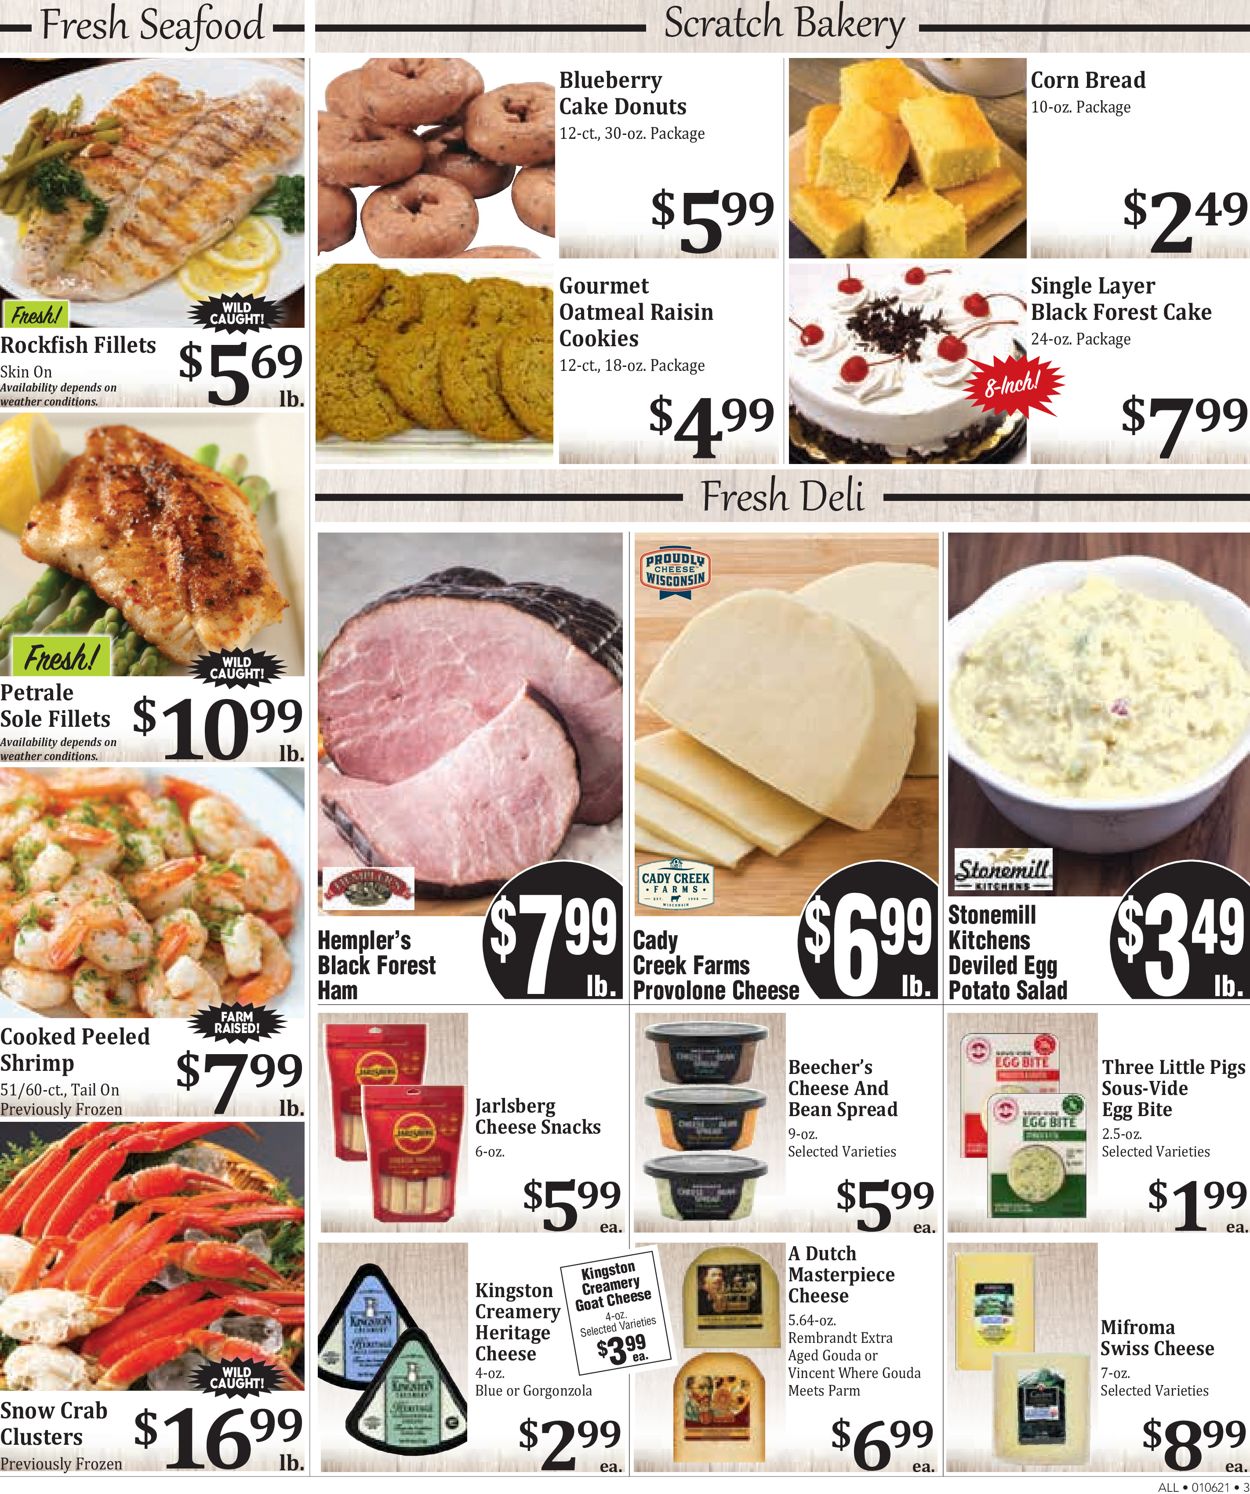 Rosauers Ad from 01/06/2021